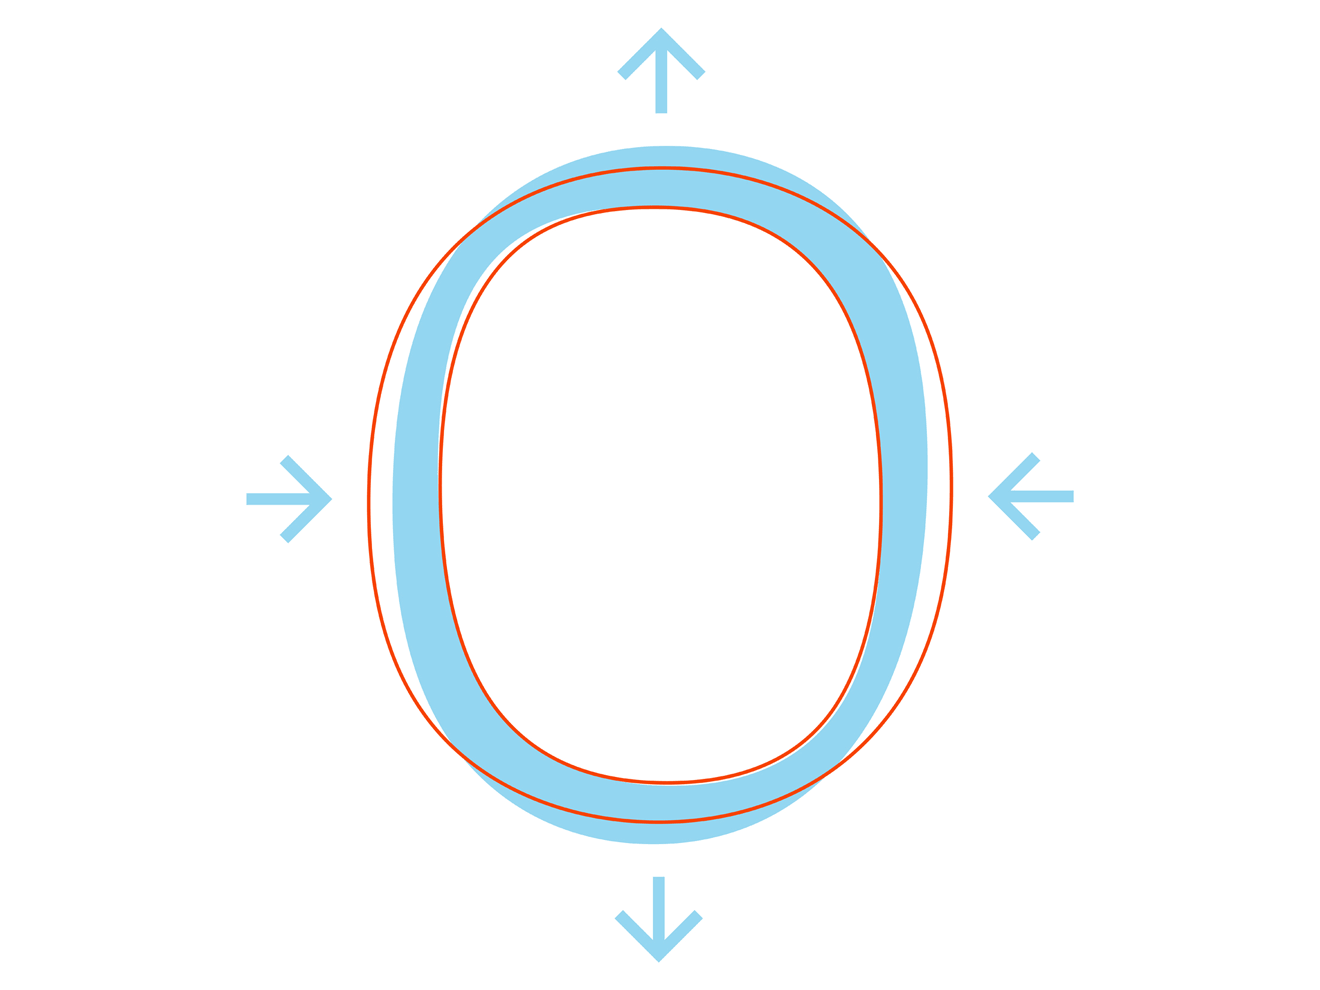 The red outline shows the conventional distribution of weight – the heavy parts in the letter ‘o’ are located on the sides, and the horizontal parts are the thinnest. The light blue Signo ‘o’ in the background shows how the weight was shifted to the top and bottom of the character.